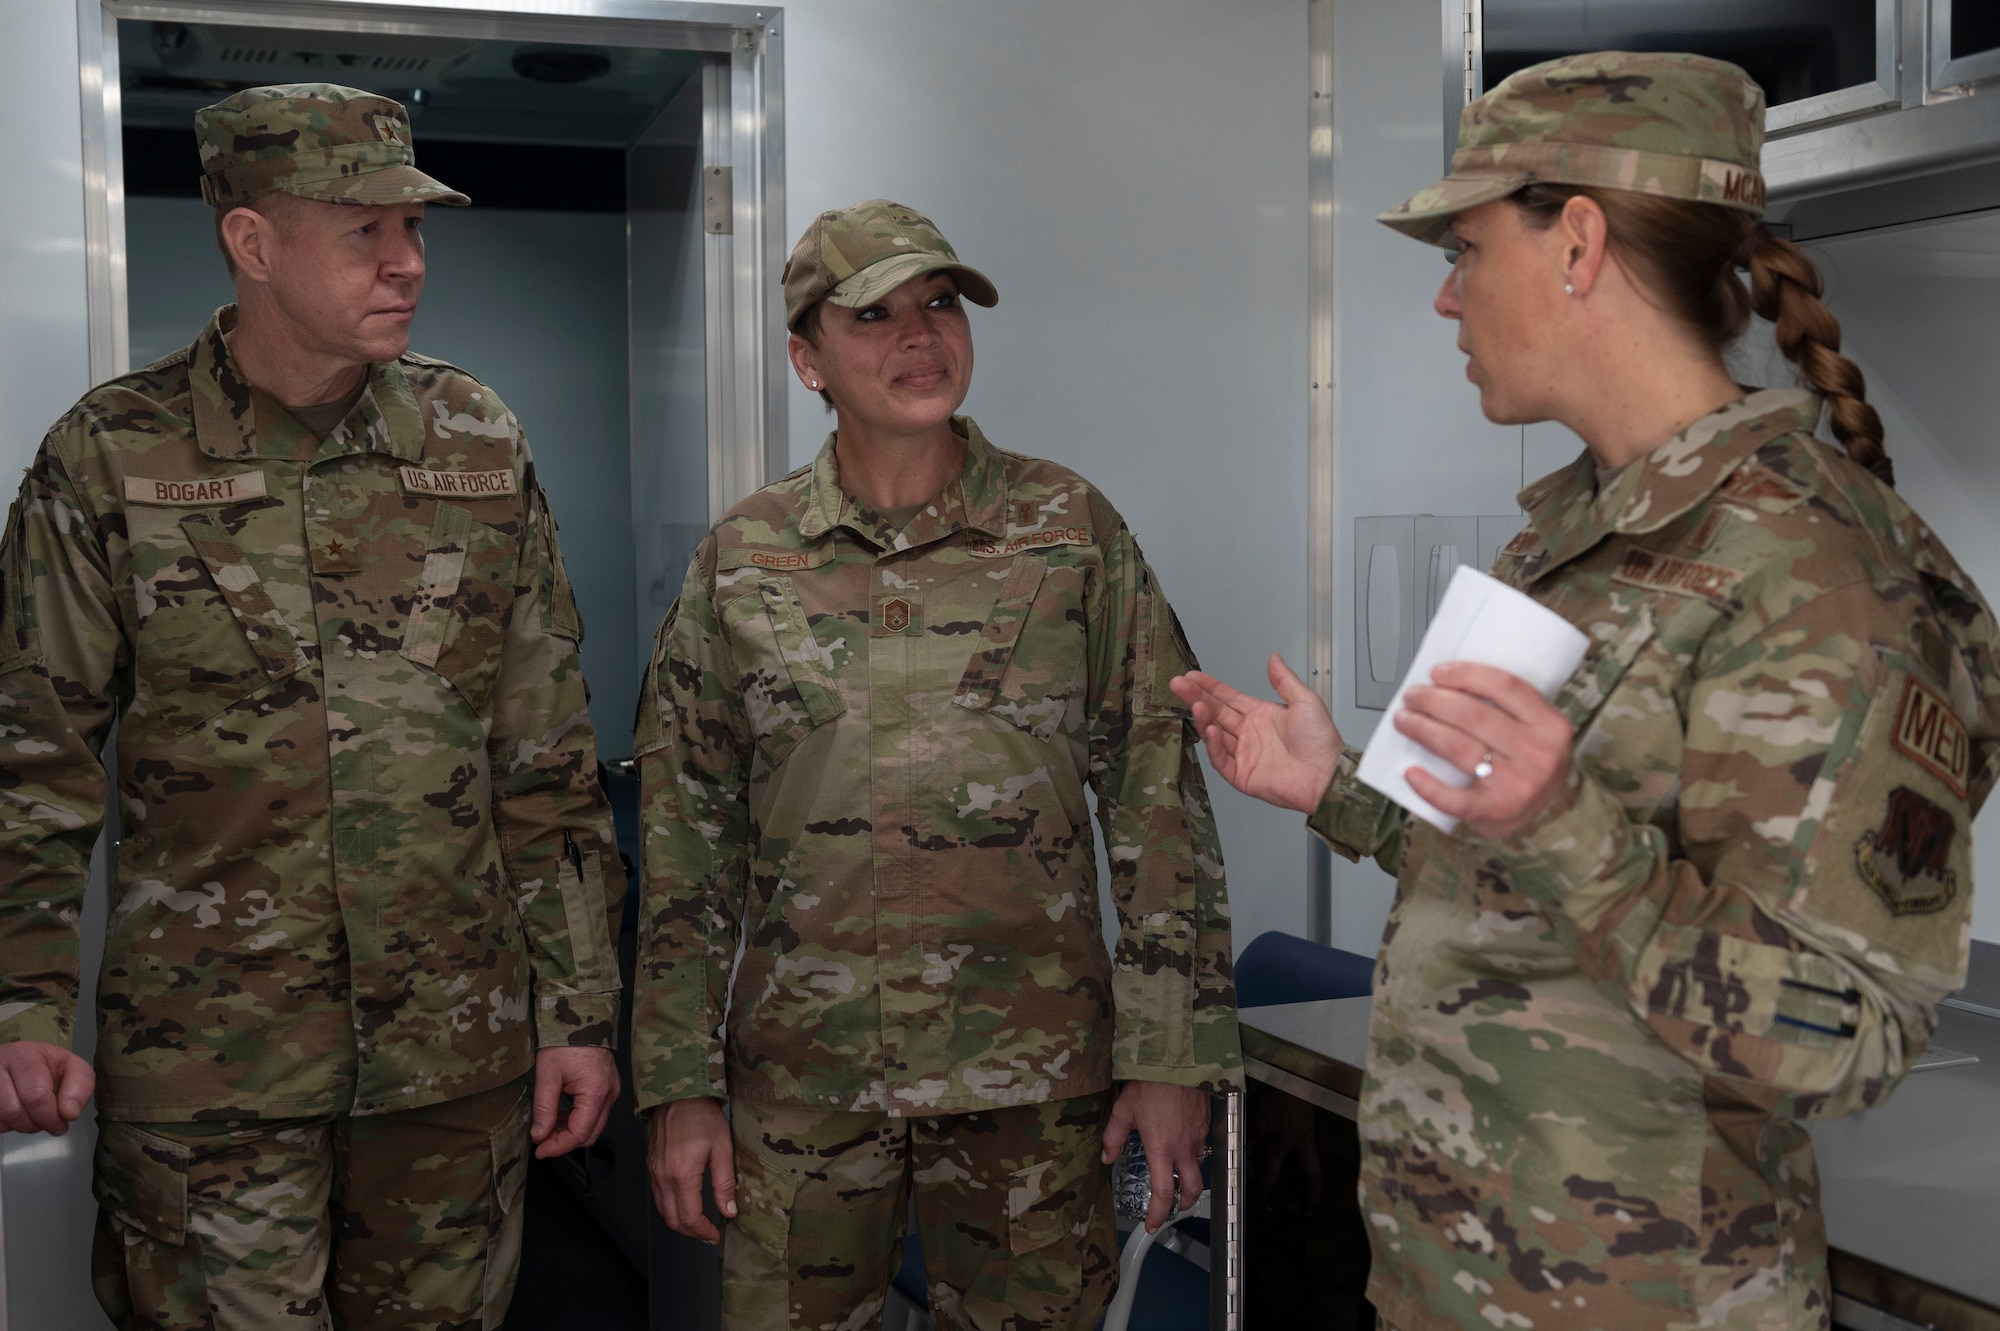 Brig. Gen. (Dr.) Robert Bogart, Air Combat Command command surgeon (left), and Chief Master Sgt. Kimberly Green, Air Combat Command chief of medical enlisted force, are briefed about the 4th Medical Group’s medical trailer by Lt. Col. Hattie McAviney, 4th Operational Medical Readiness Squadron commander, during a tour at Seymour Johnson Air Force Base, North Carolina, April 6, 2022. The 4th MDG has the second medical trailer in the Air Force which is used for mass-processing of Airmen. (U.S. Air Force photo by Senior Airman Kevin Holloway)